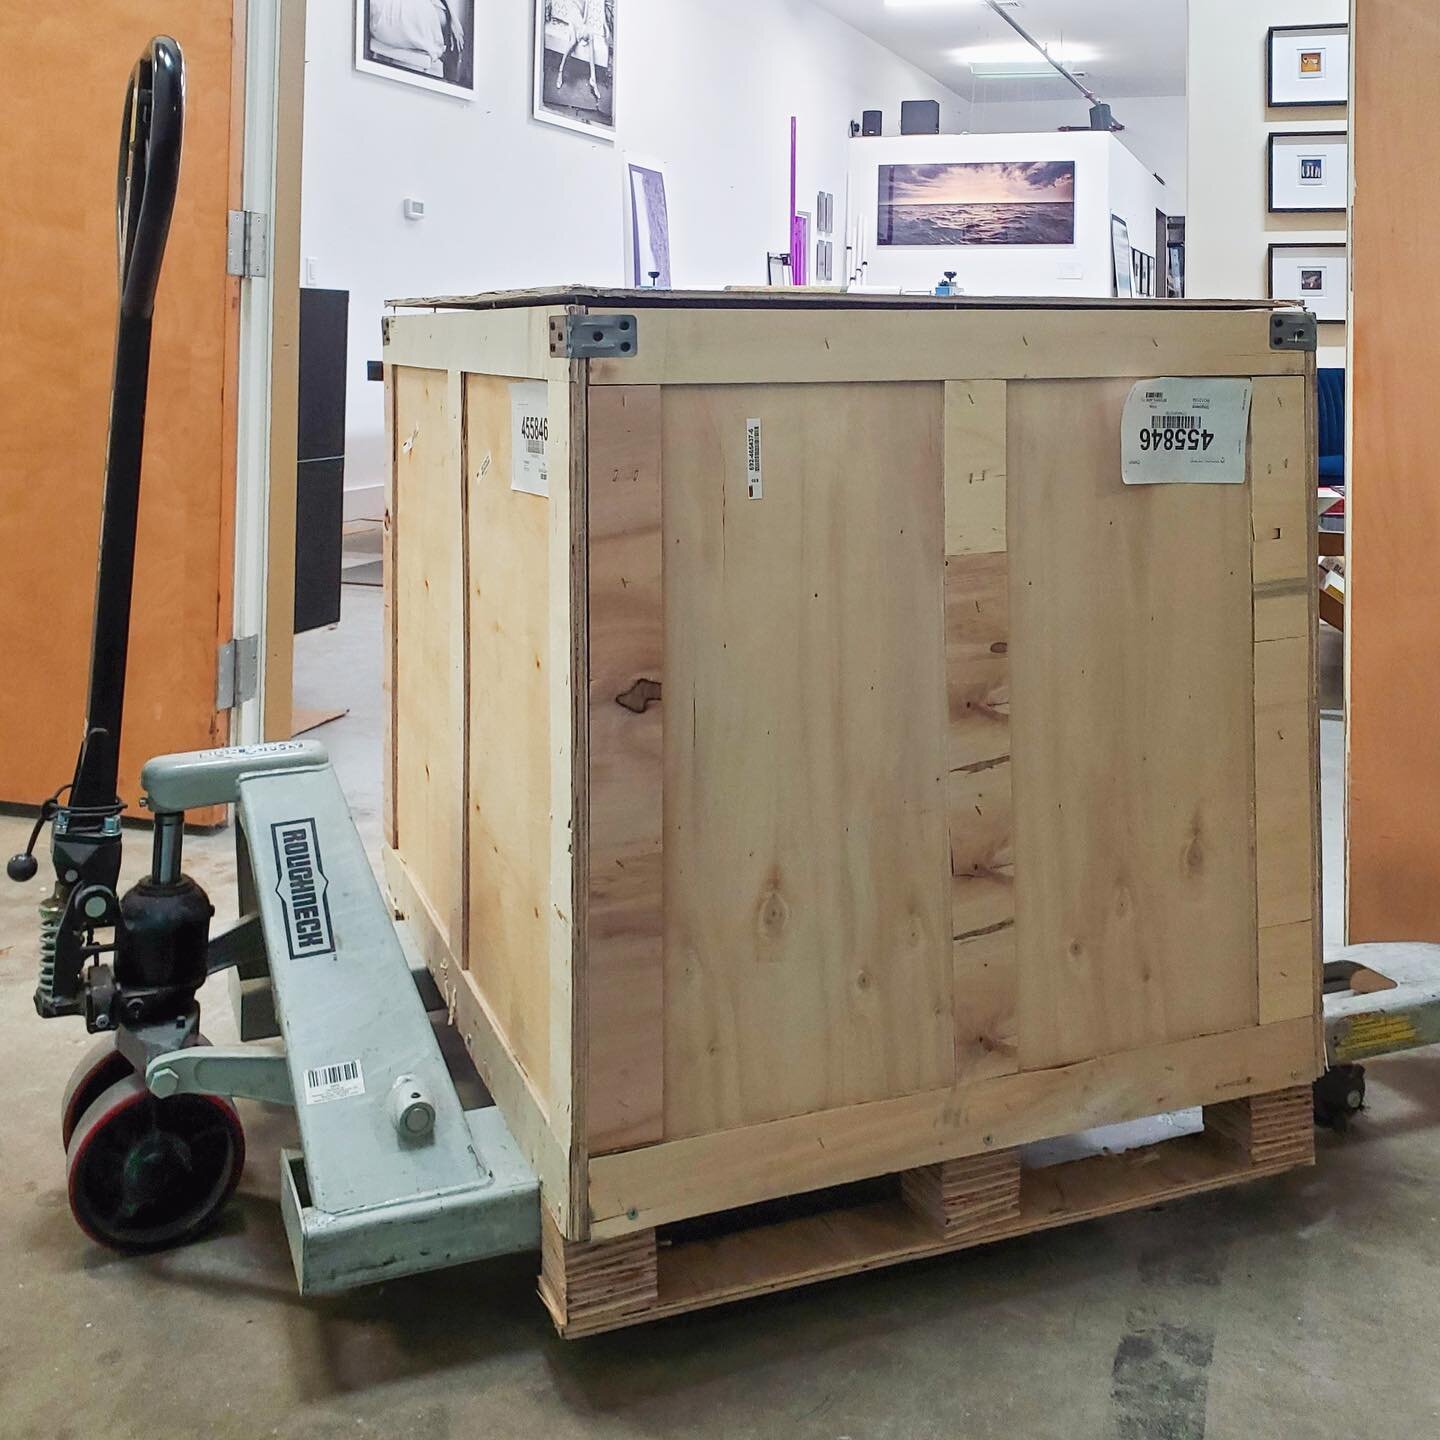 First component of a new printing system has arrived📦 More details coming 🔜!
.
.
.
#doteditions #doteditionsfineartprint #printstudio #specialdelivery #printingservice #printingcompany #newservice #newequipment #ashevillebusiness #avllocal #ashevil